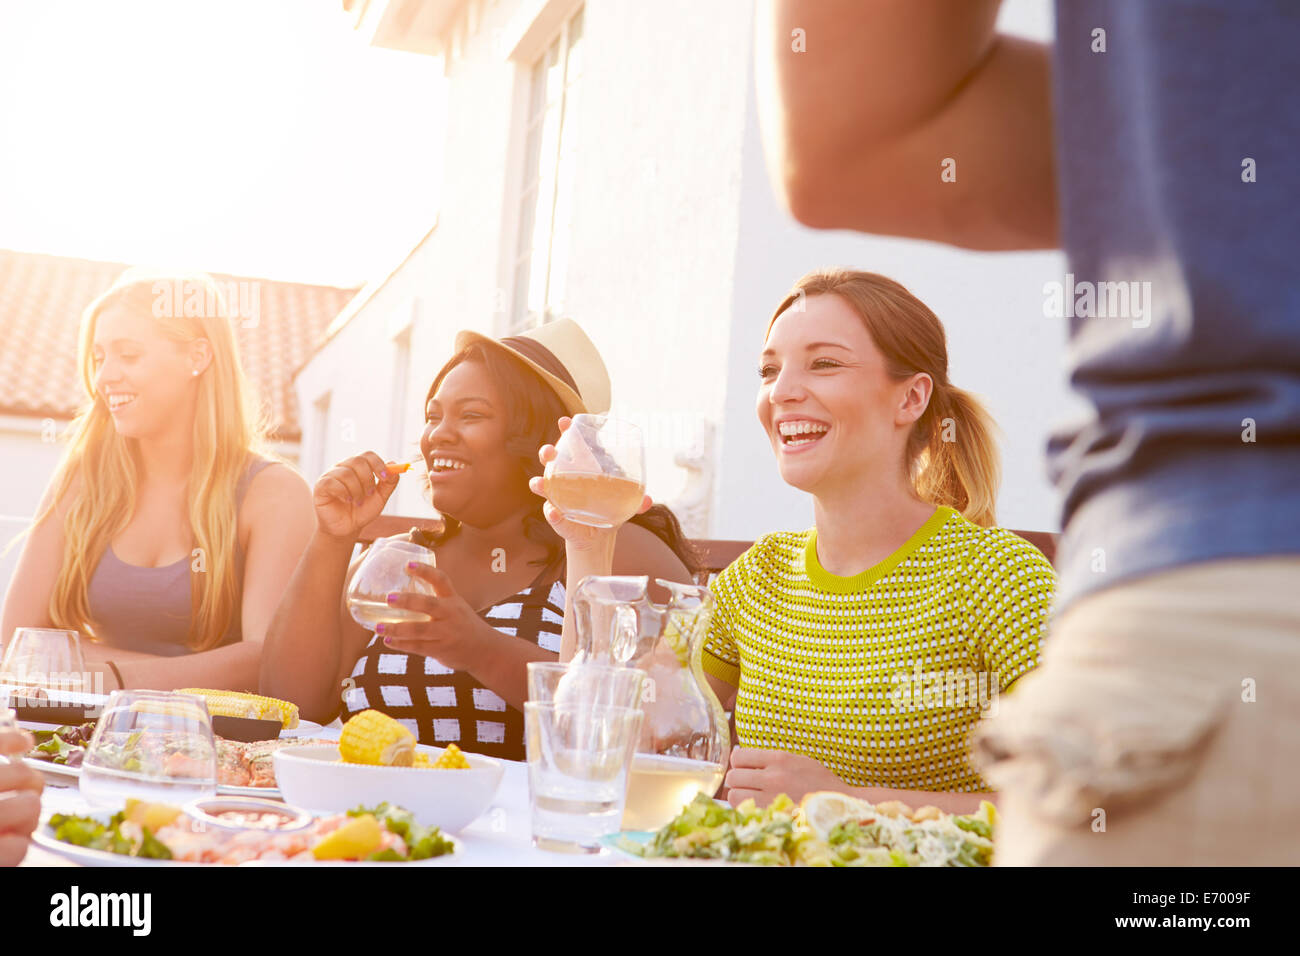 Group Of Young People Enjoying Outdoor Summer Meal Stock Photo